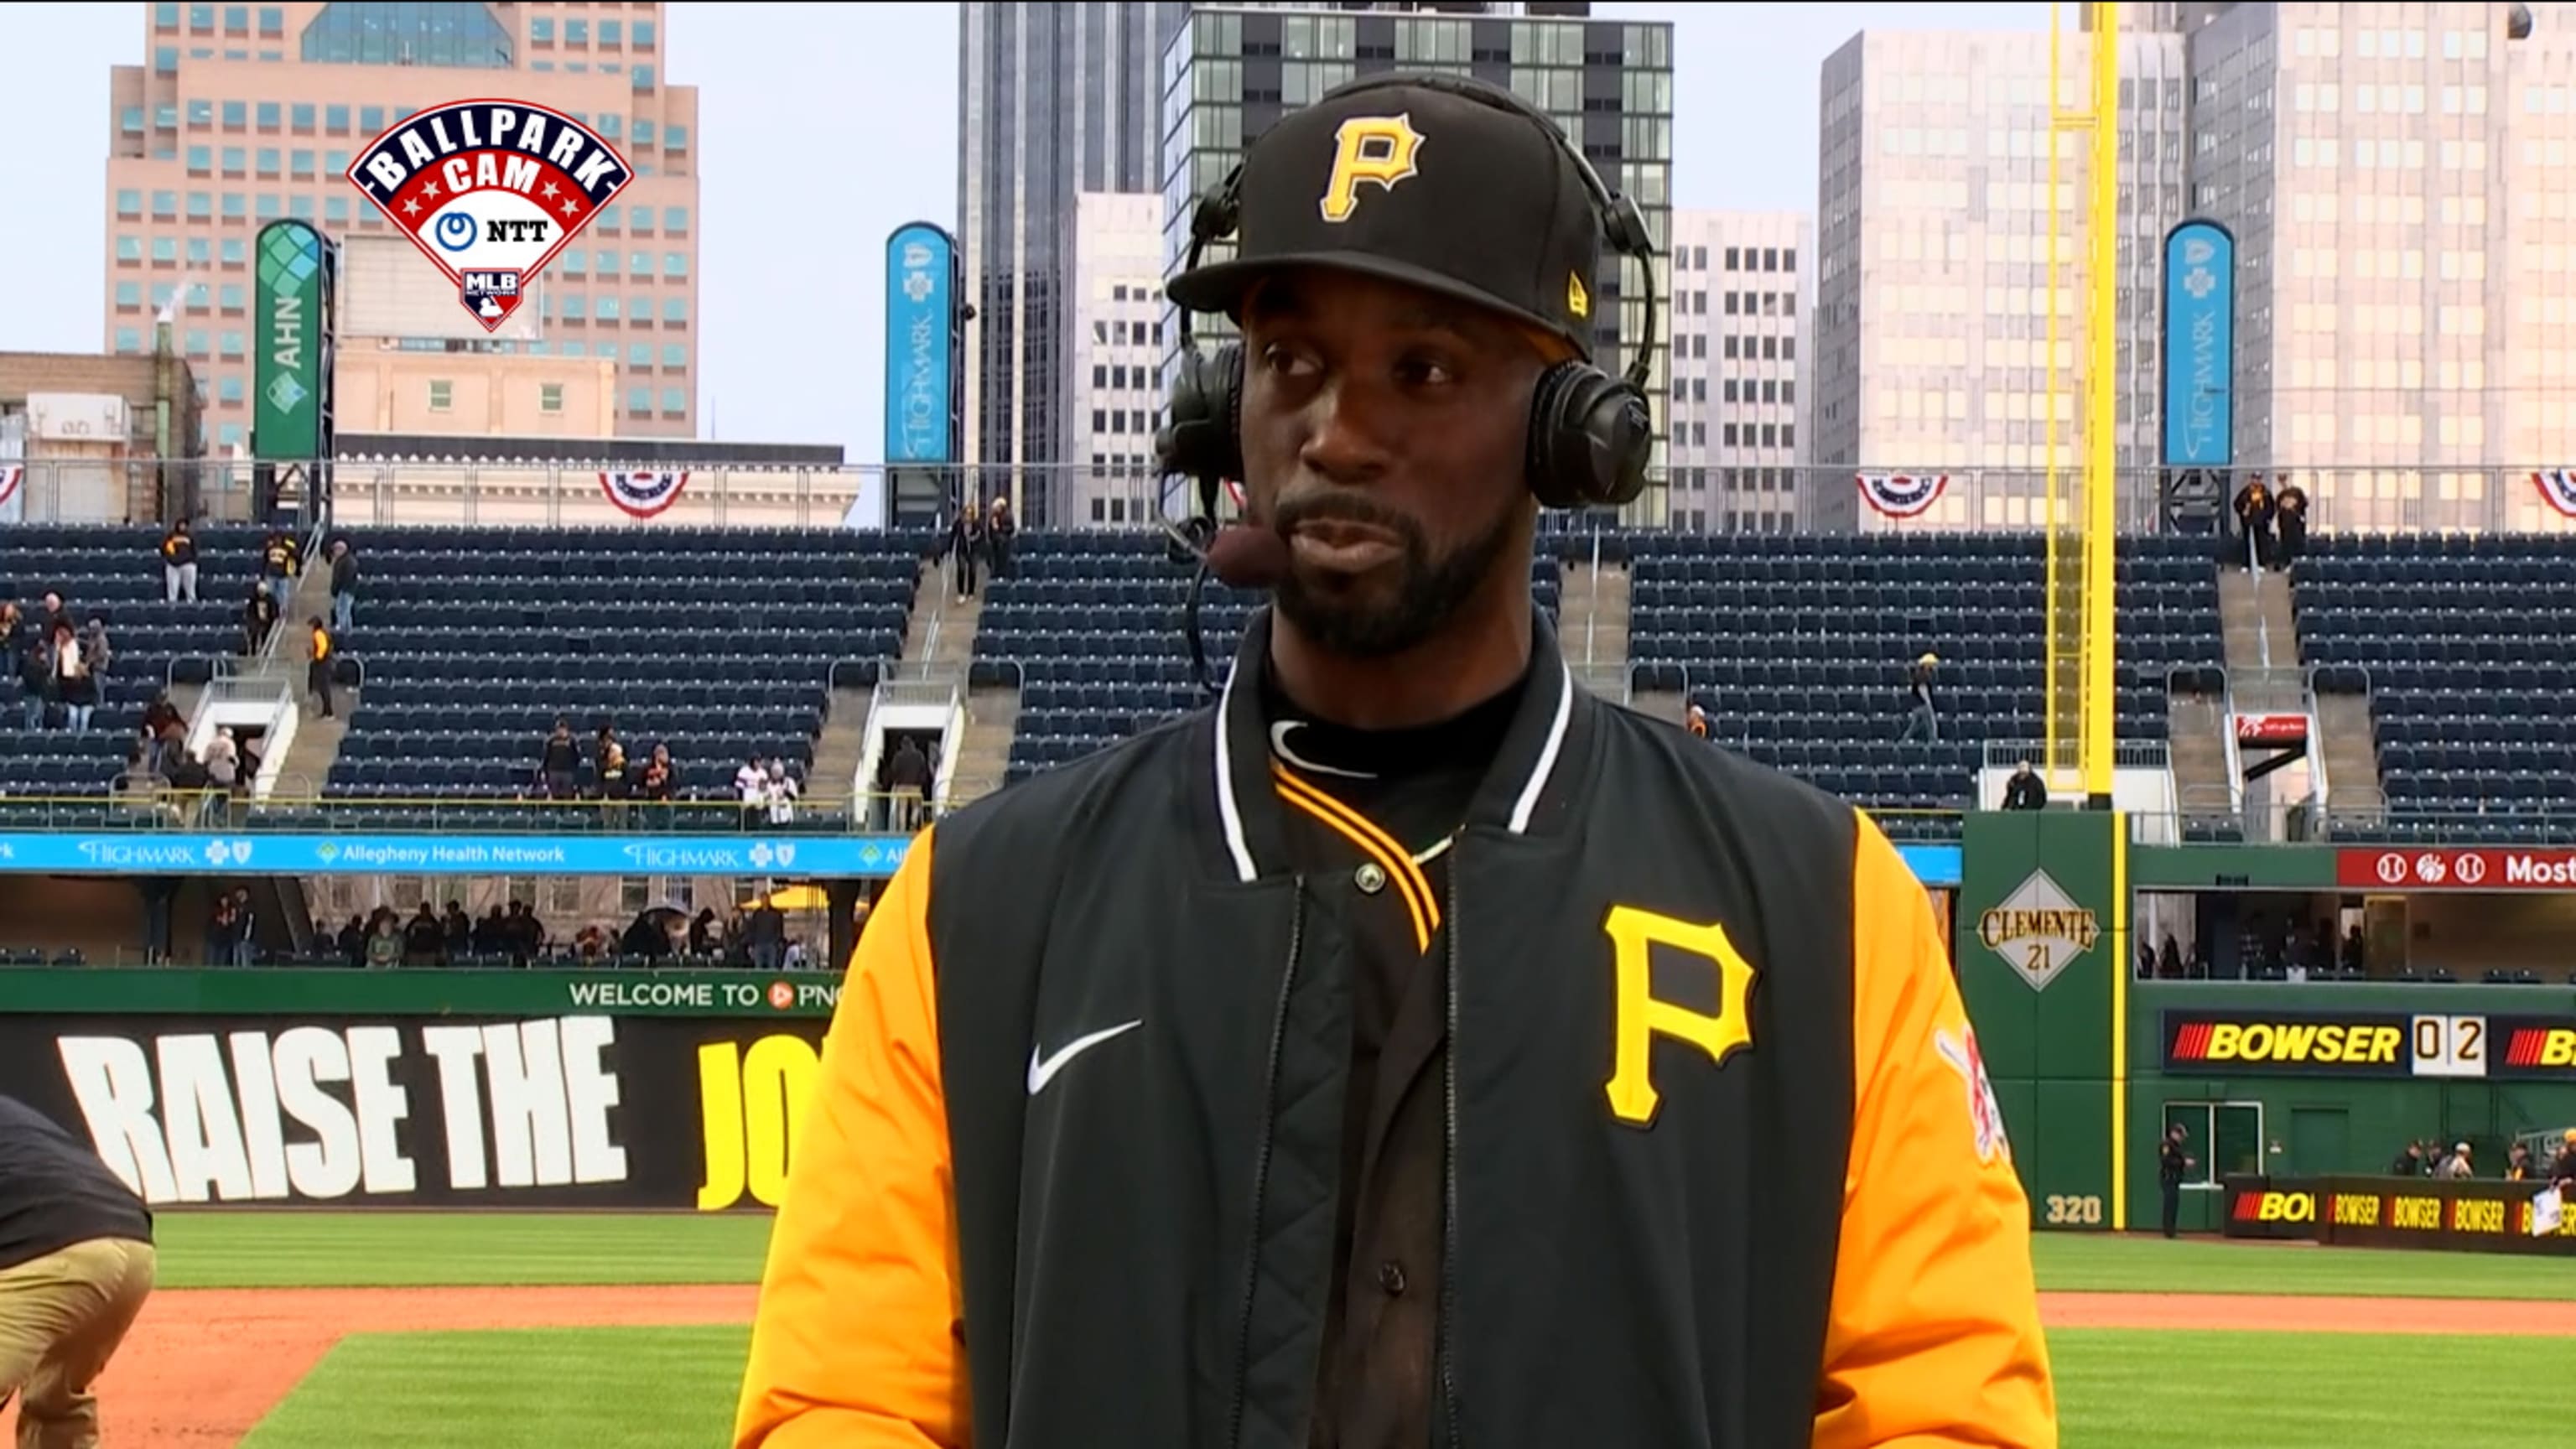 Fans rejoice as Andrew McCutchen returns to Pittsburgh Pirates